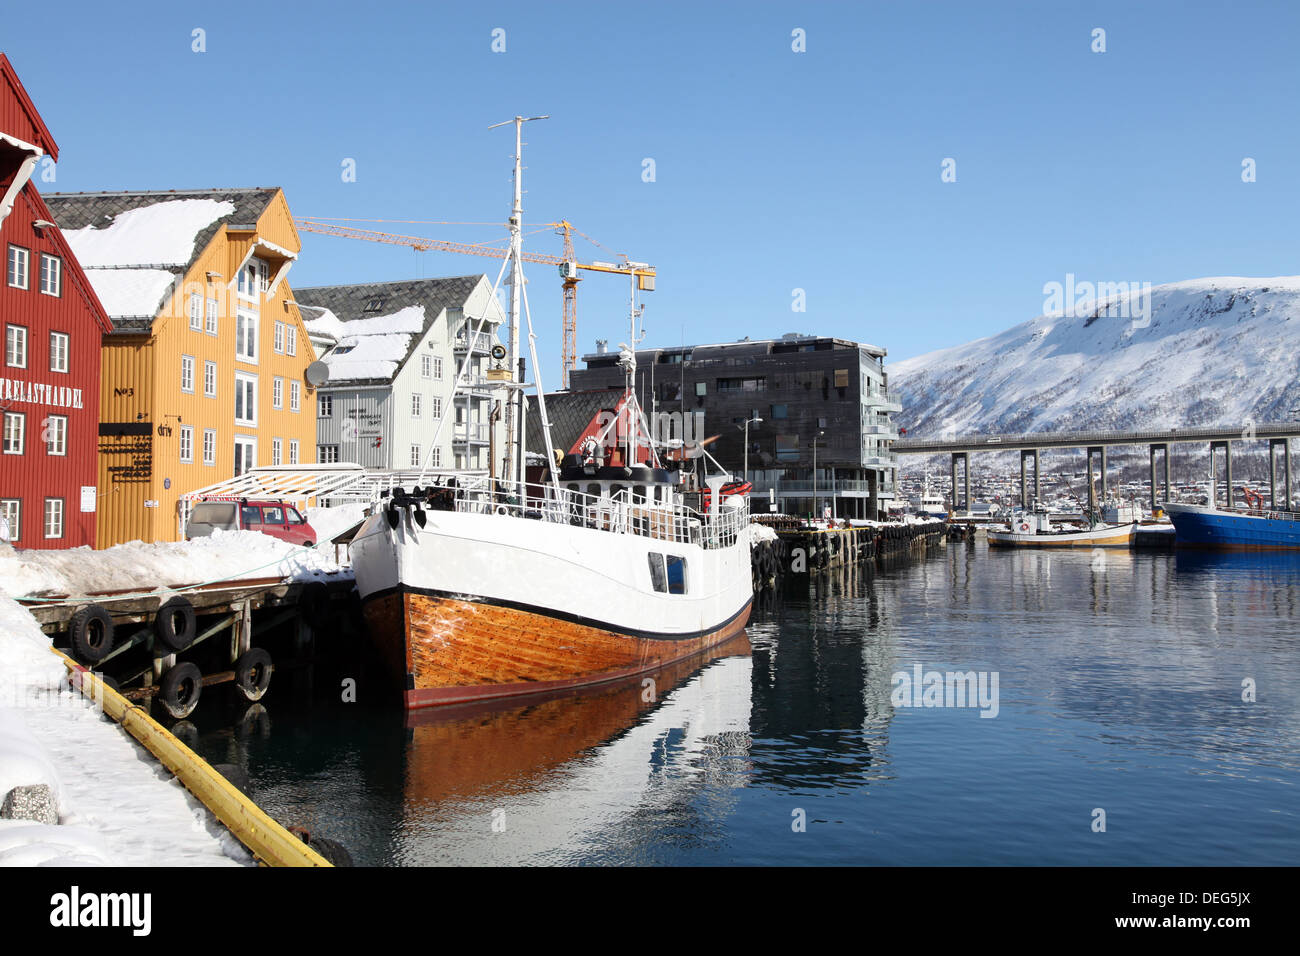 The whaler that used to go to Svalbard, with warehouses behind that have been converted into offices, Tromso, Troms, Norway Stock Photo